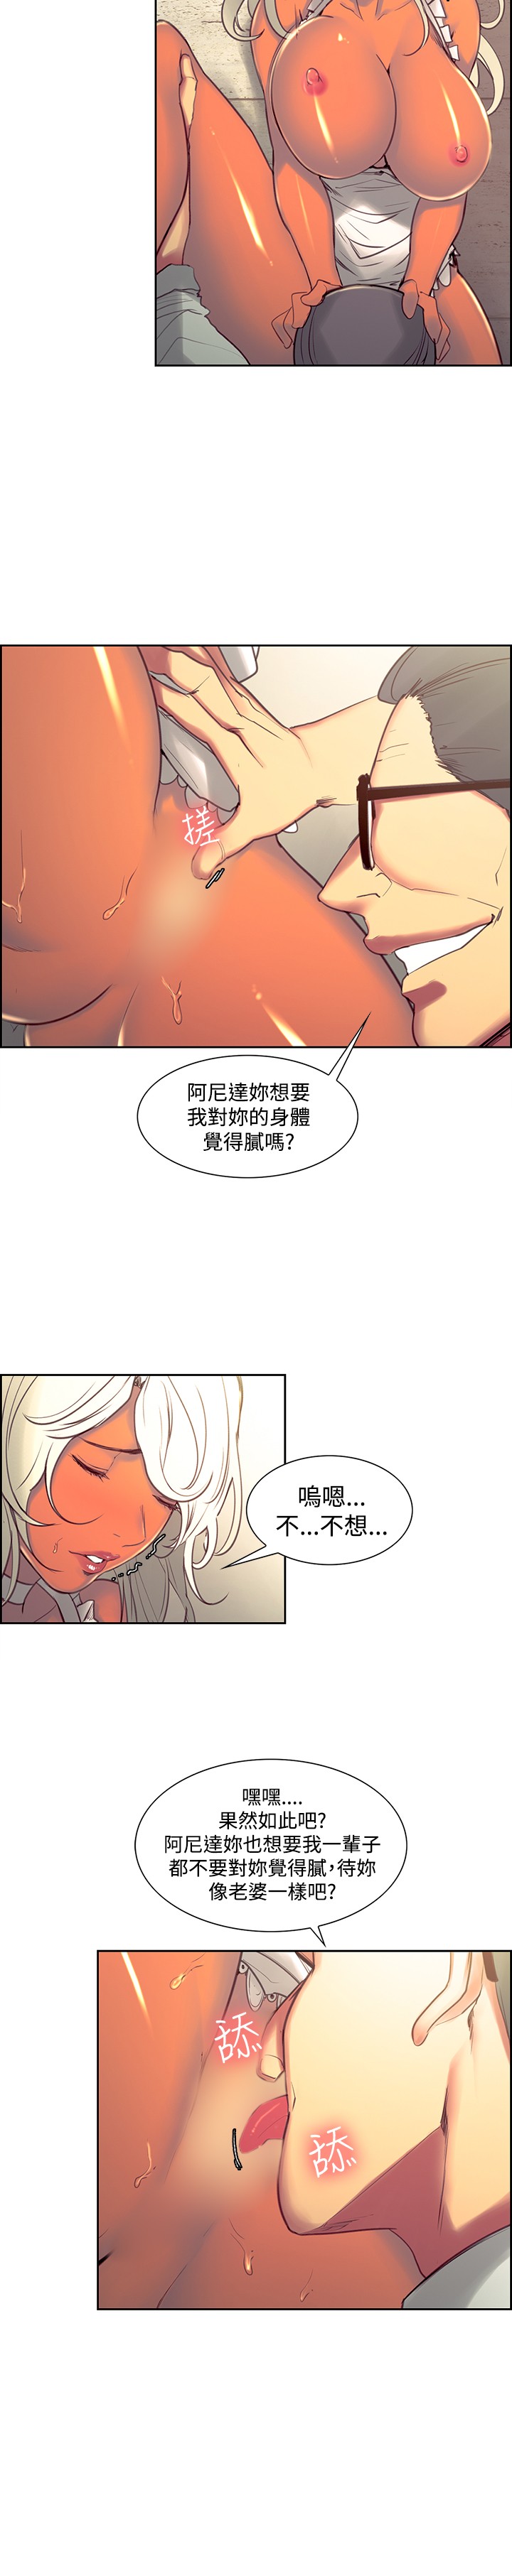 [Serious] Domesticate the Housekeeper 调教家政妇 Ch.29~41 [Chinese]中文 page 42 full